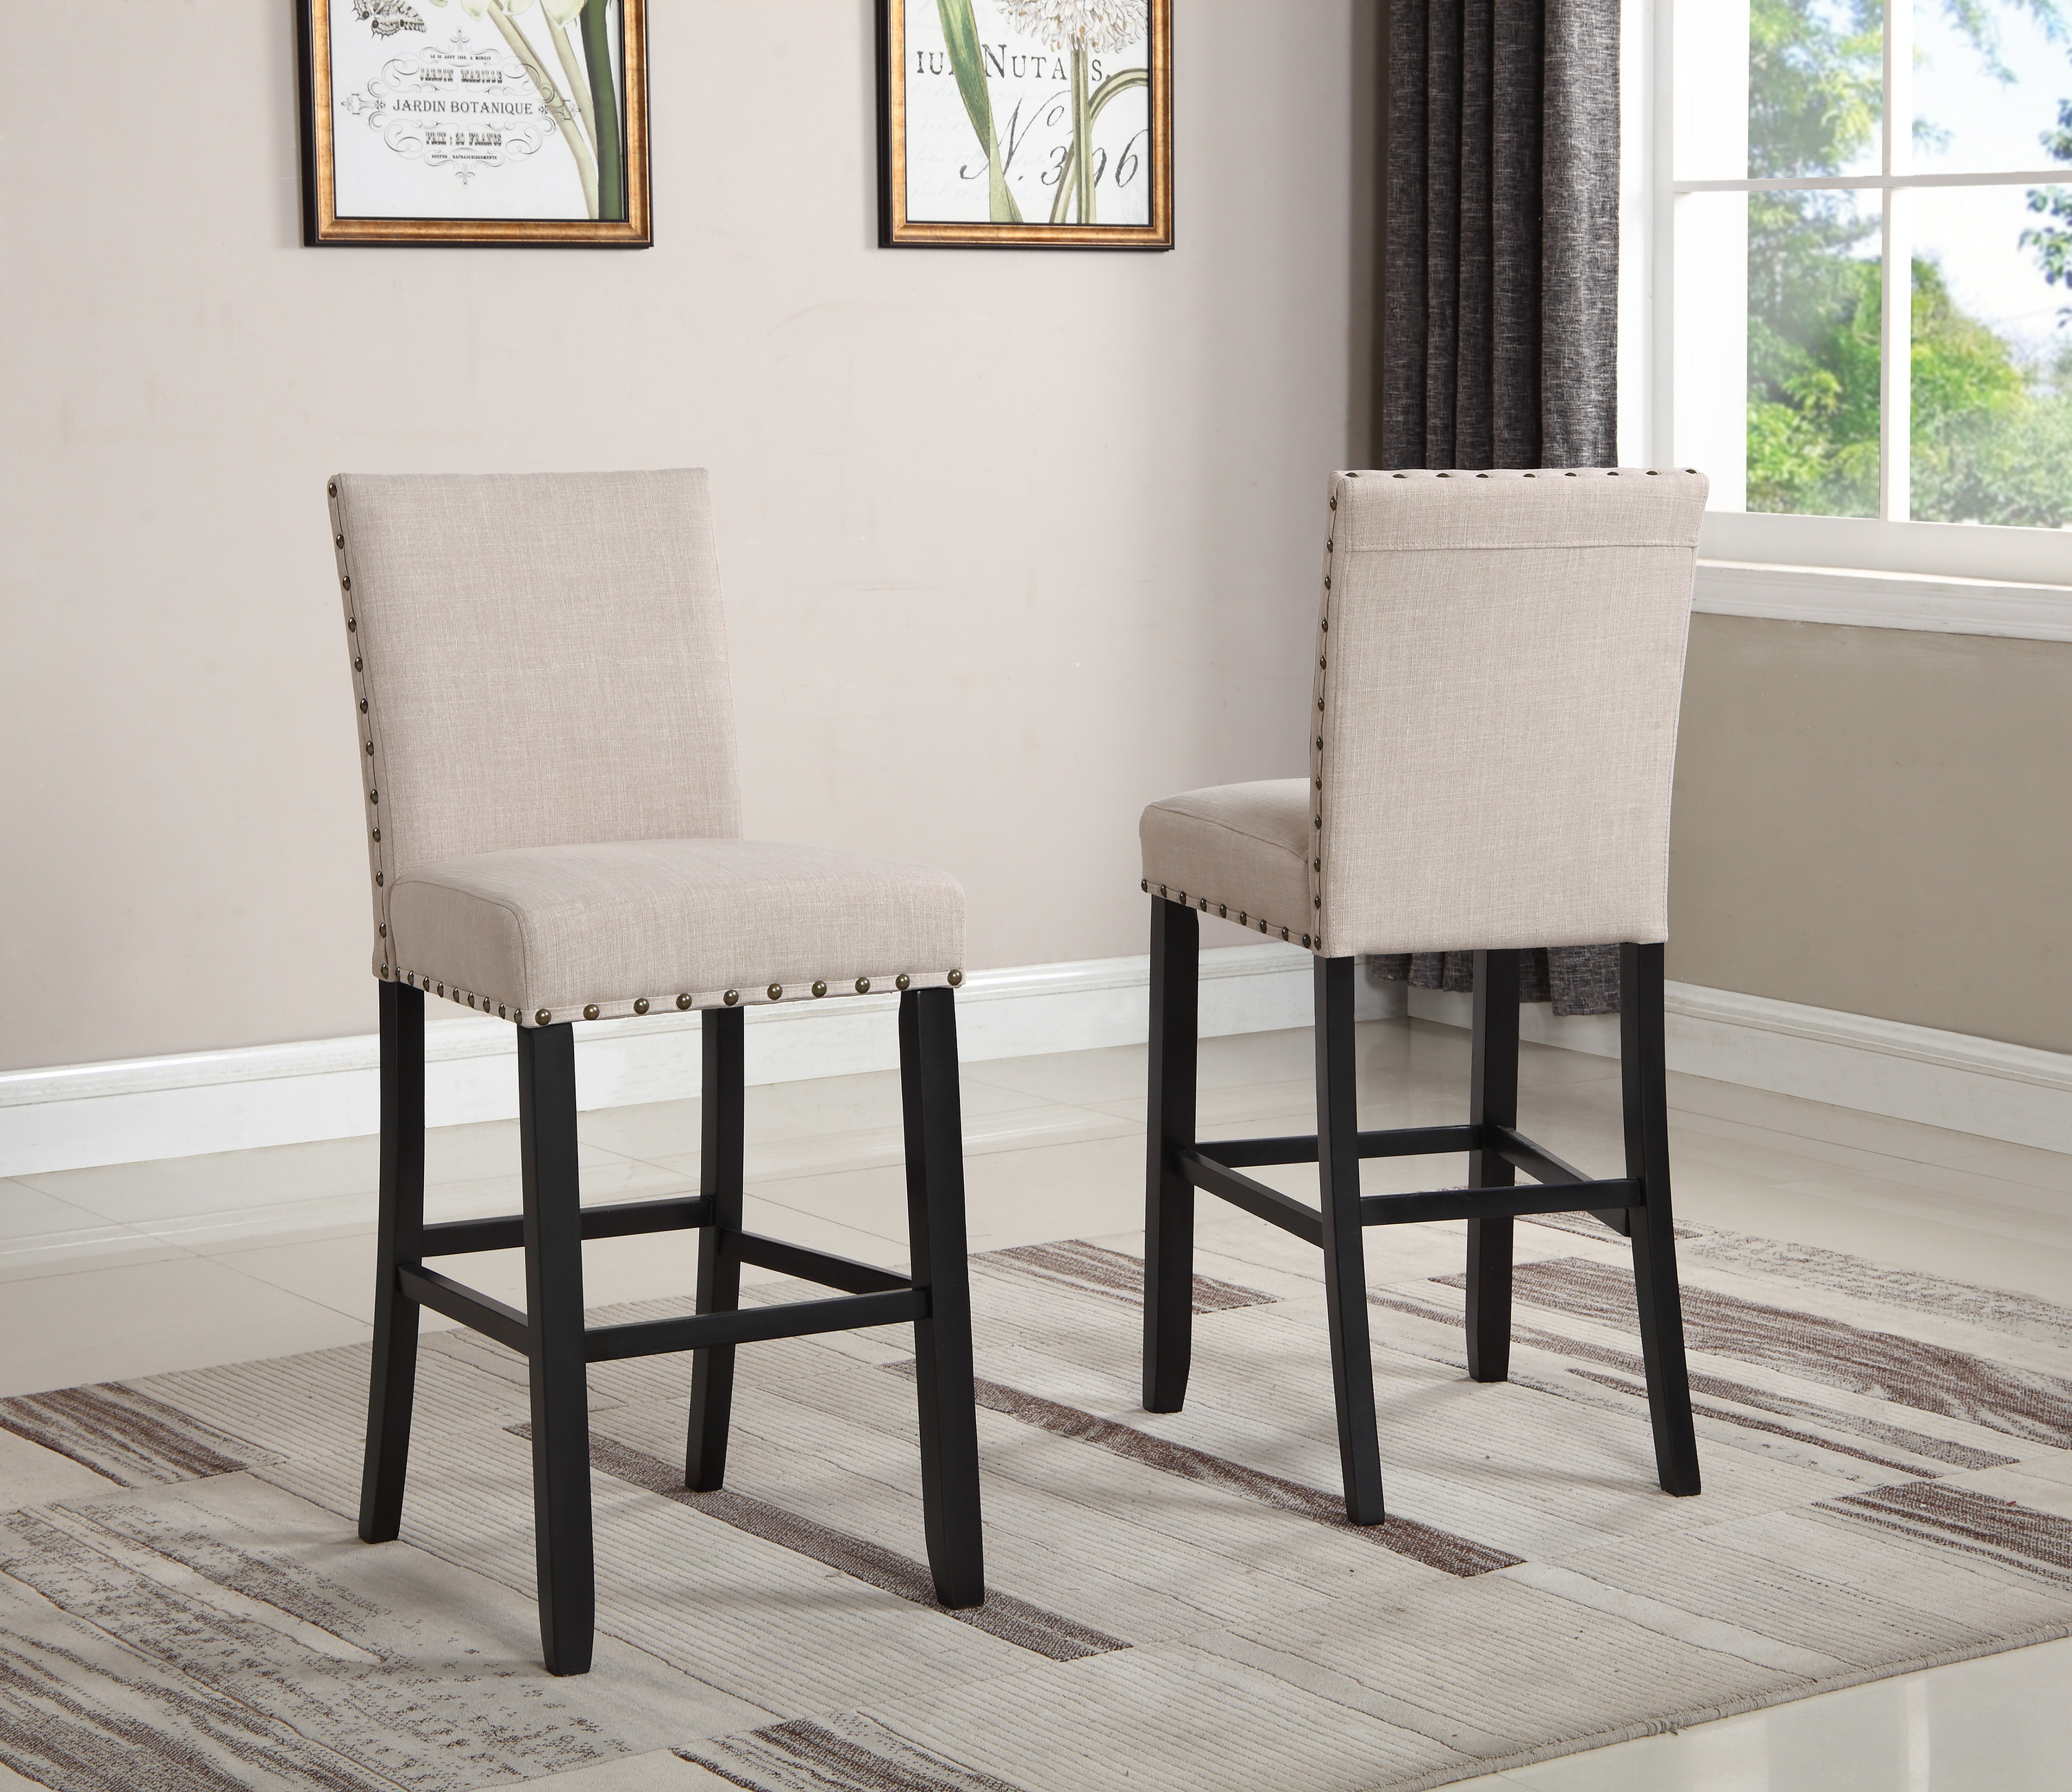 Two tan barstools with stud details